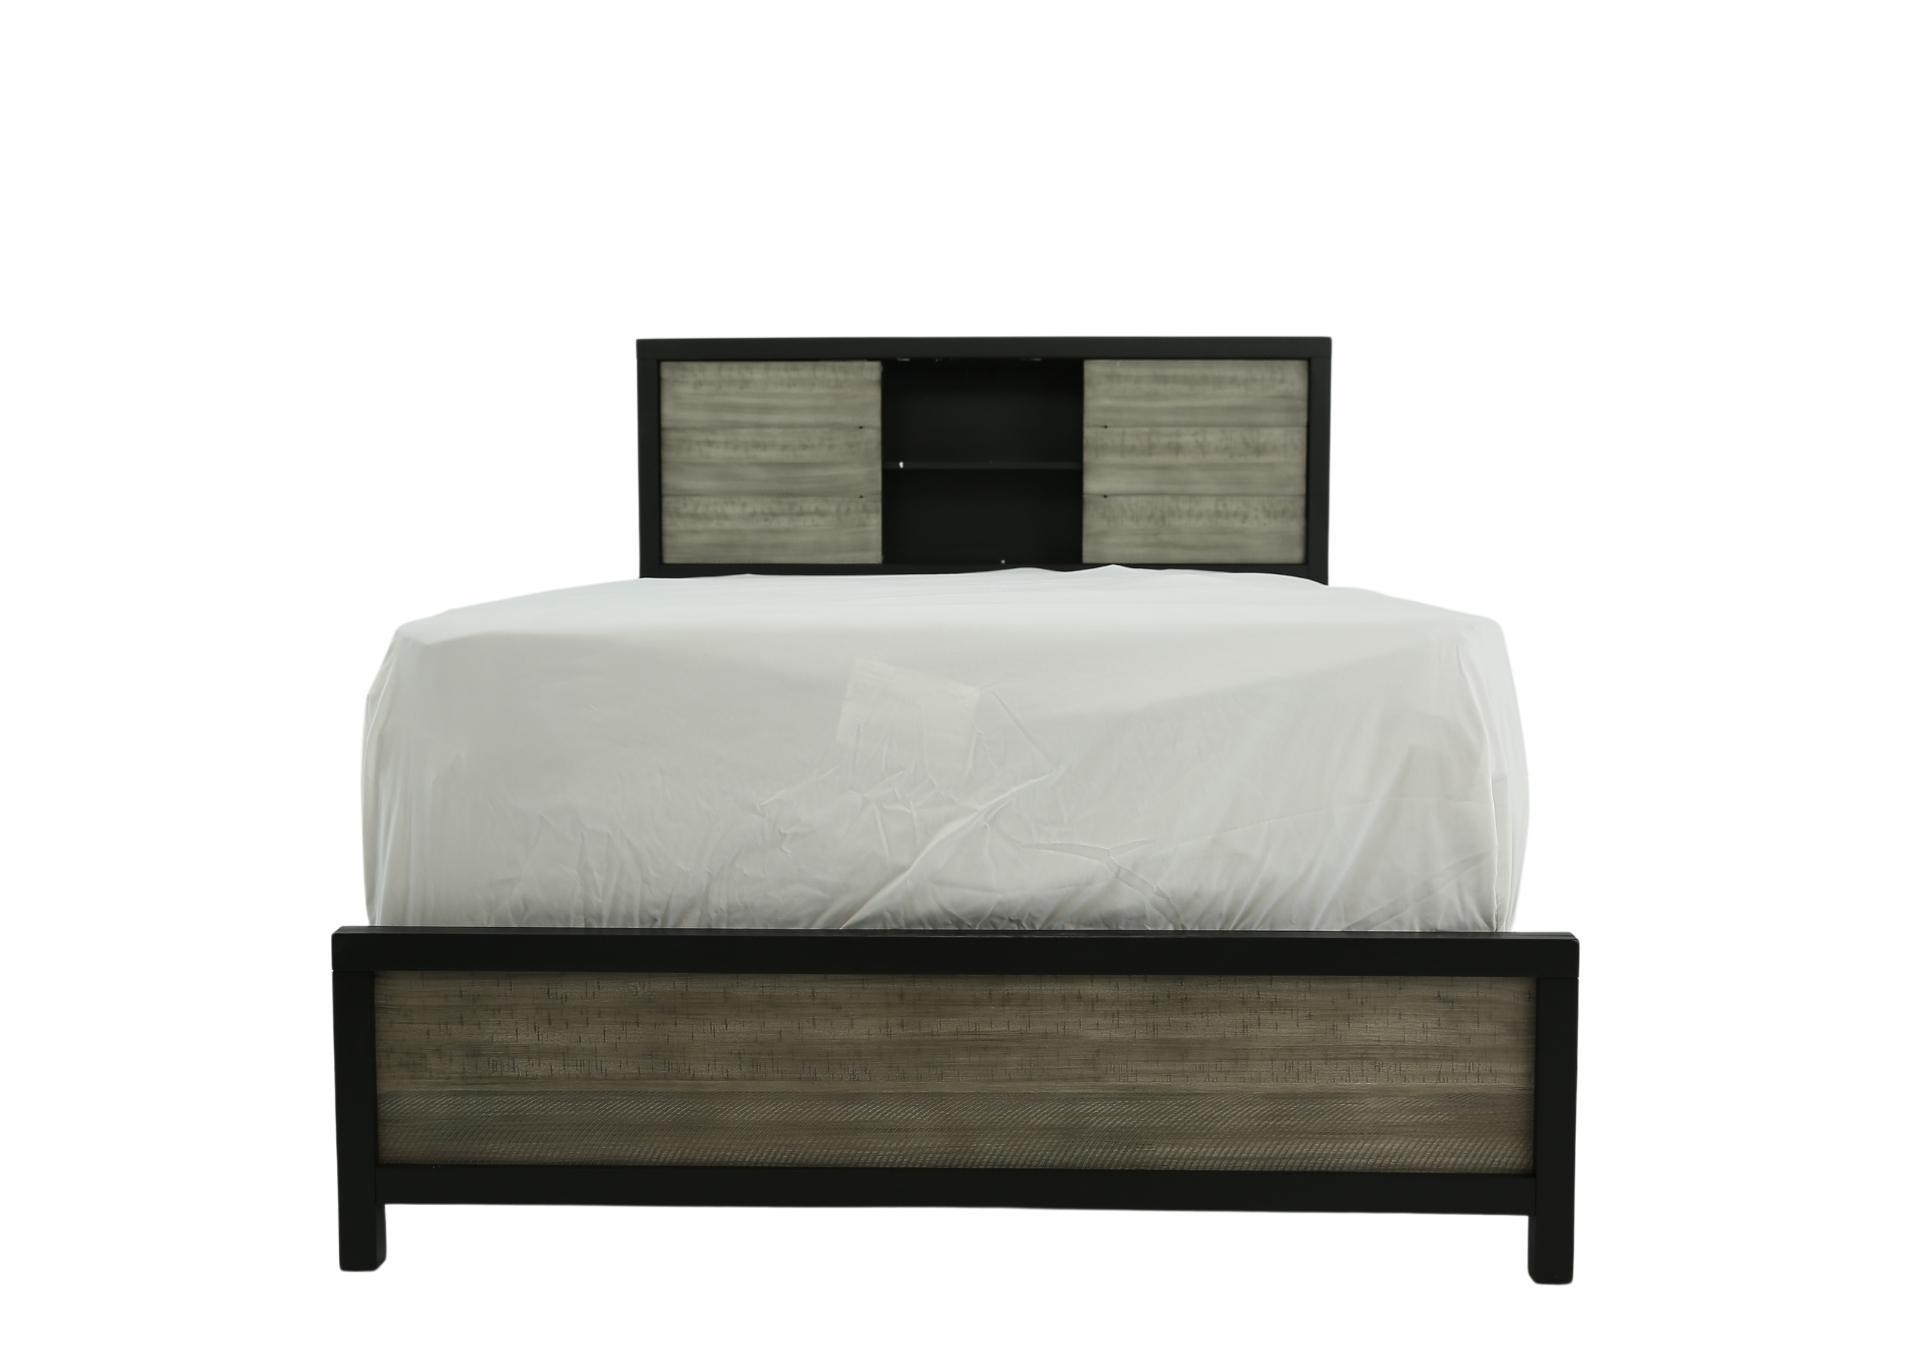 DAUGHTREY BLACK FULL BOOKCASE BED